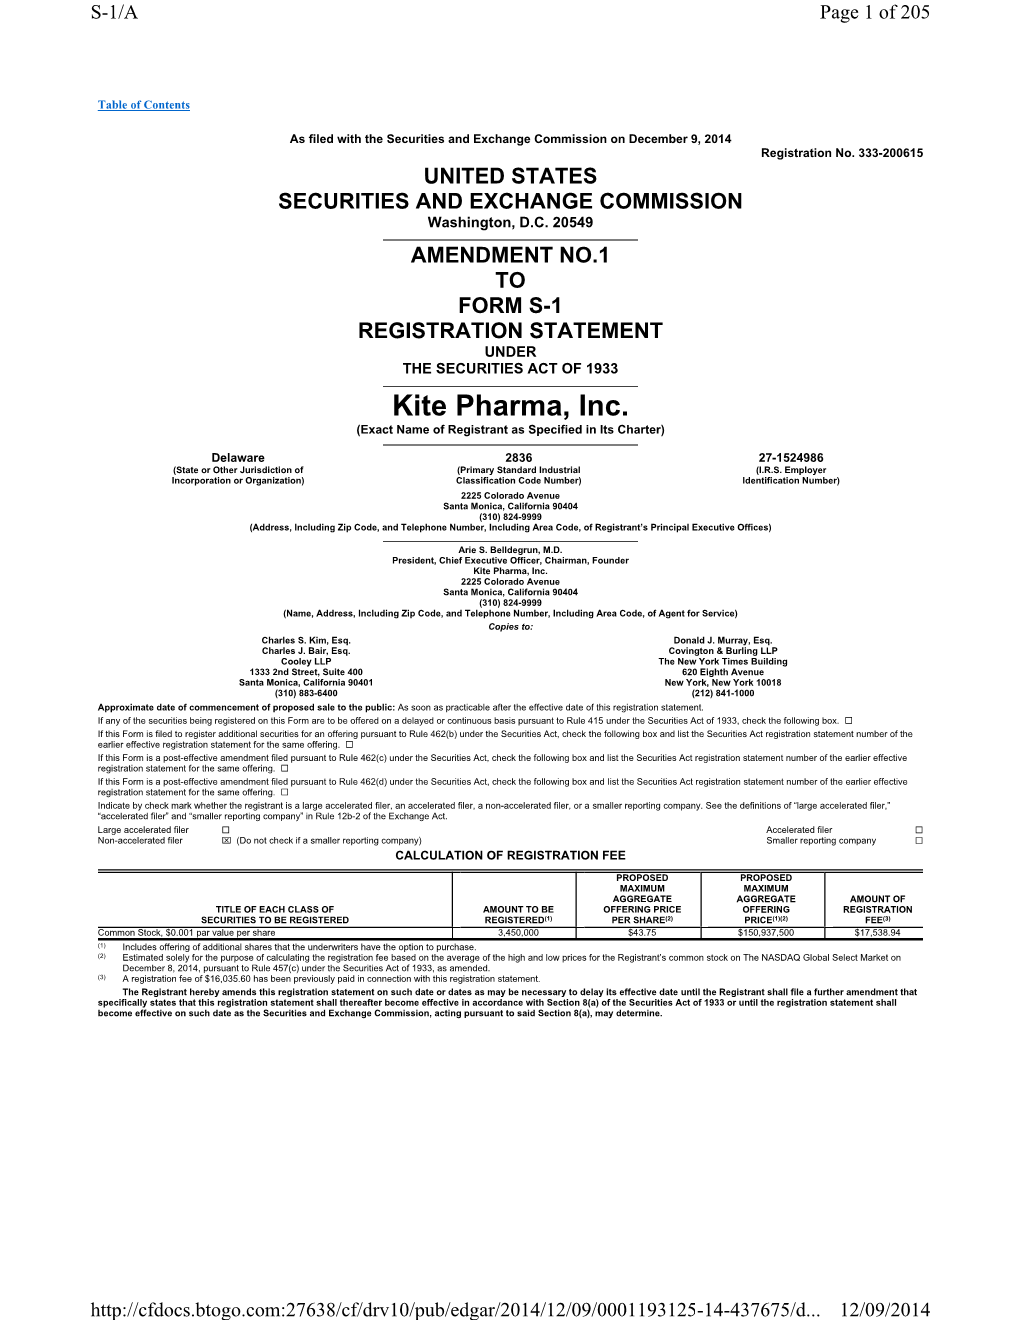 Kite Pharma, Inc. (Exact Name of Registrant As Specified in Its Charter)